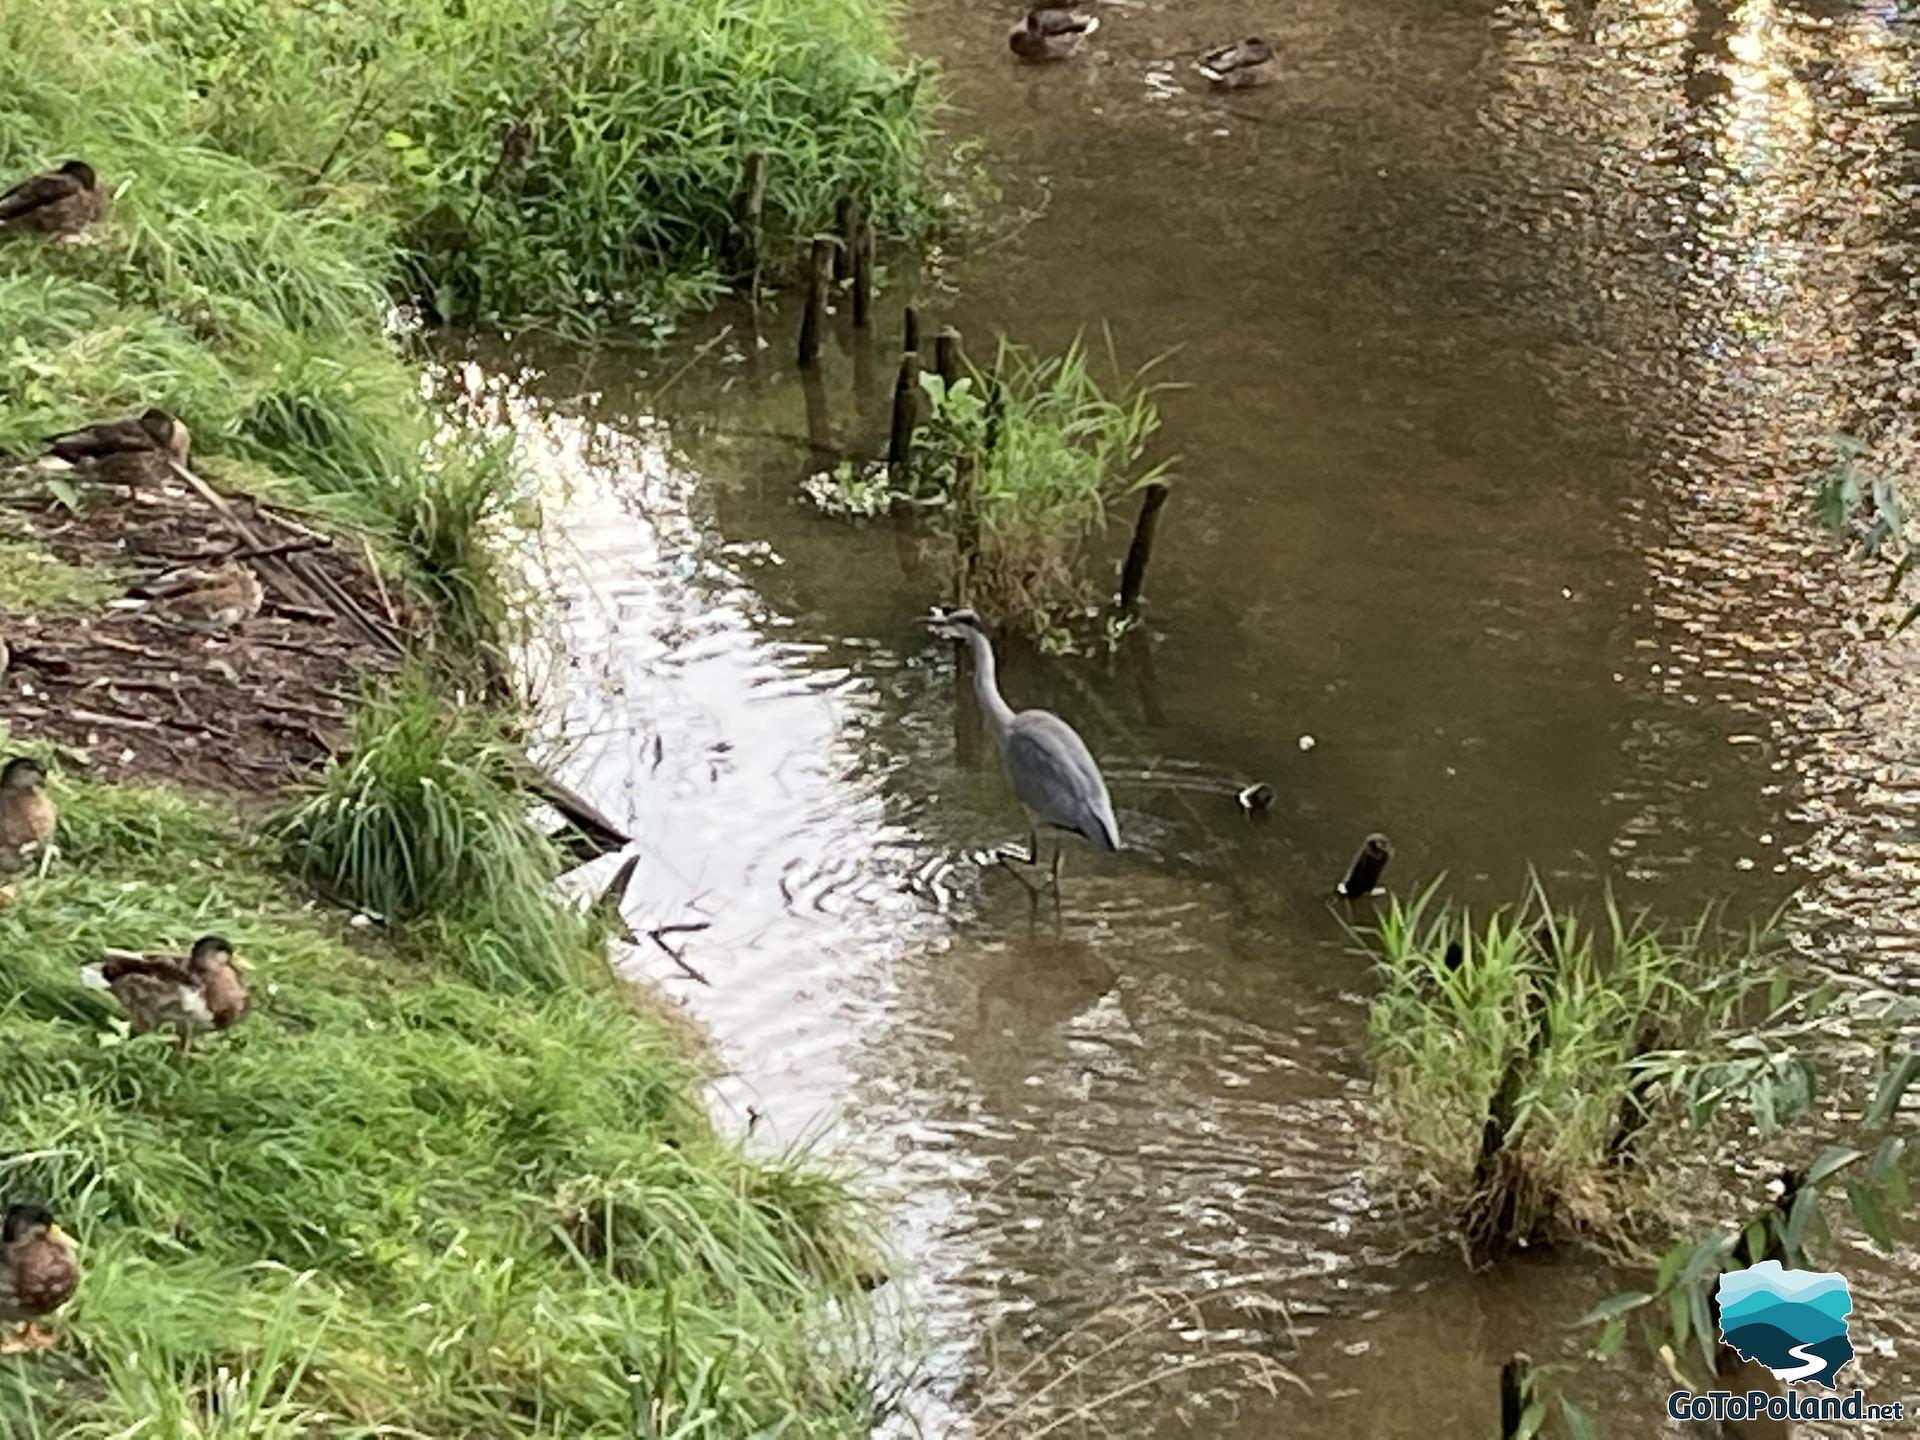 A gray heron wading in the river